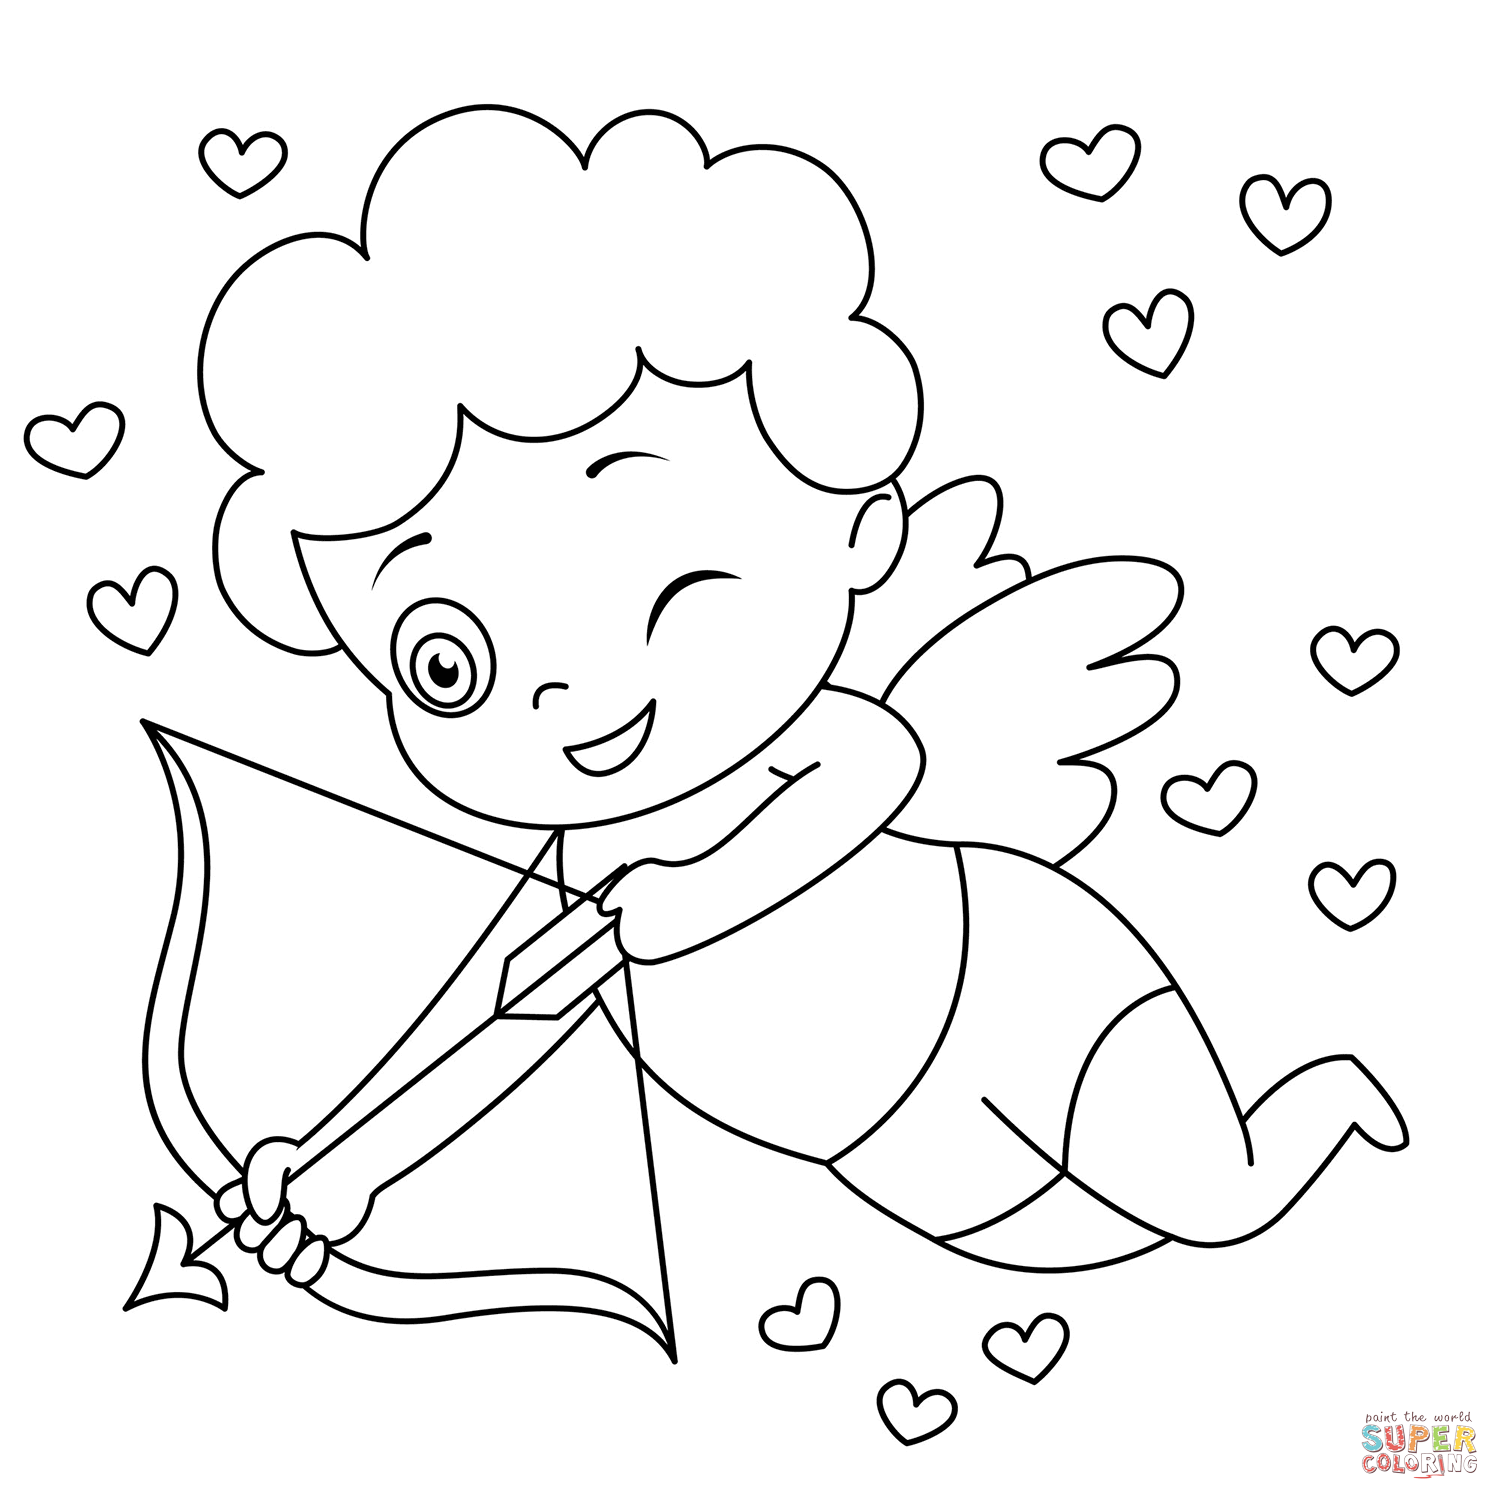 Cute cupid coloring page free printable coloring pages